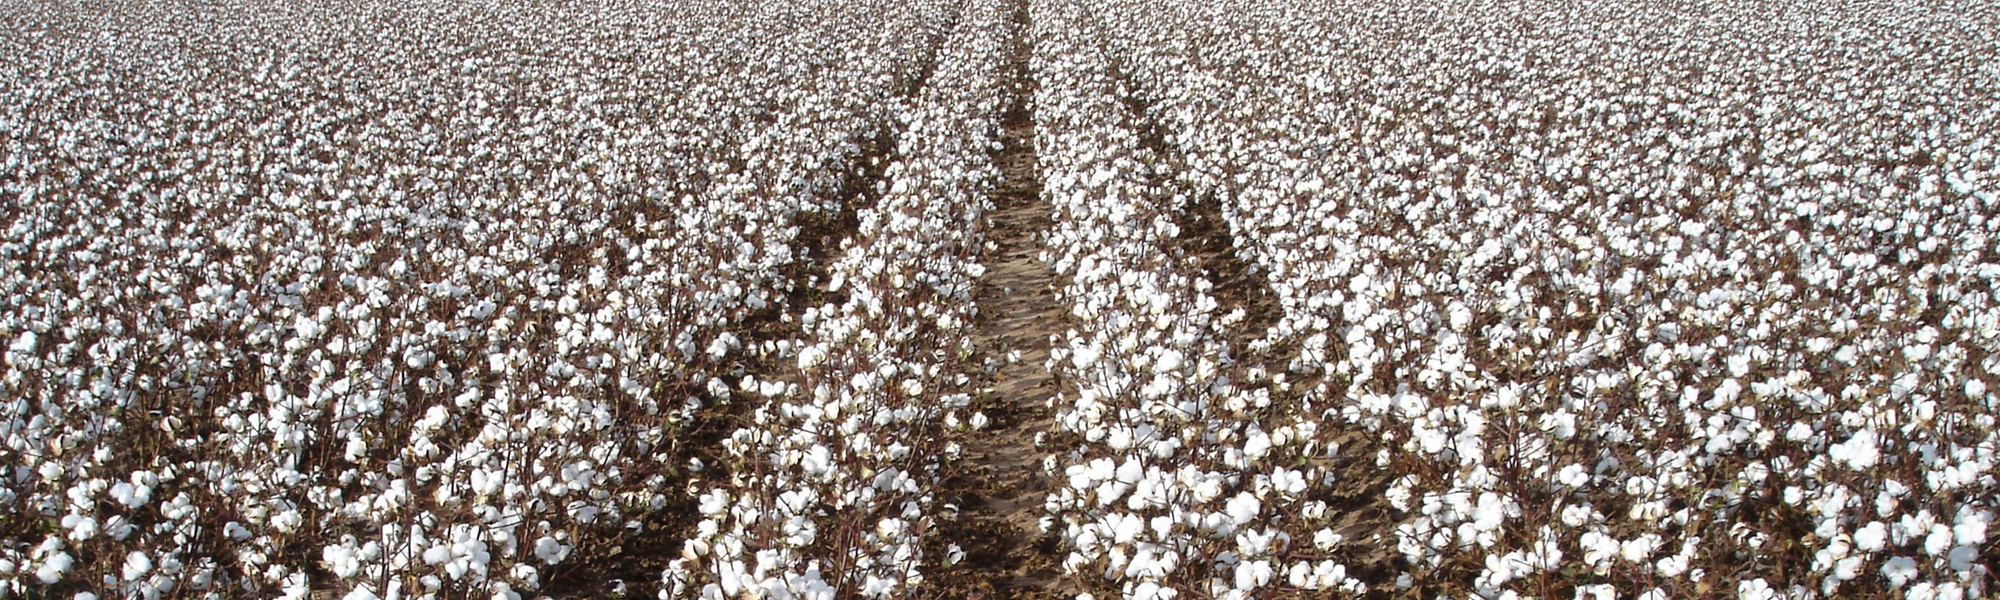 Evading Farm Support Reduction Via Efficient Input Use: The Case of Greek Cotton Growers